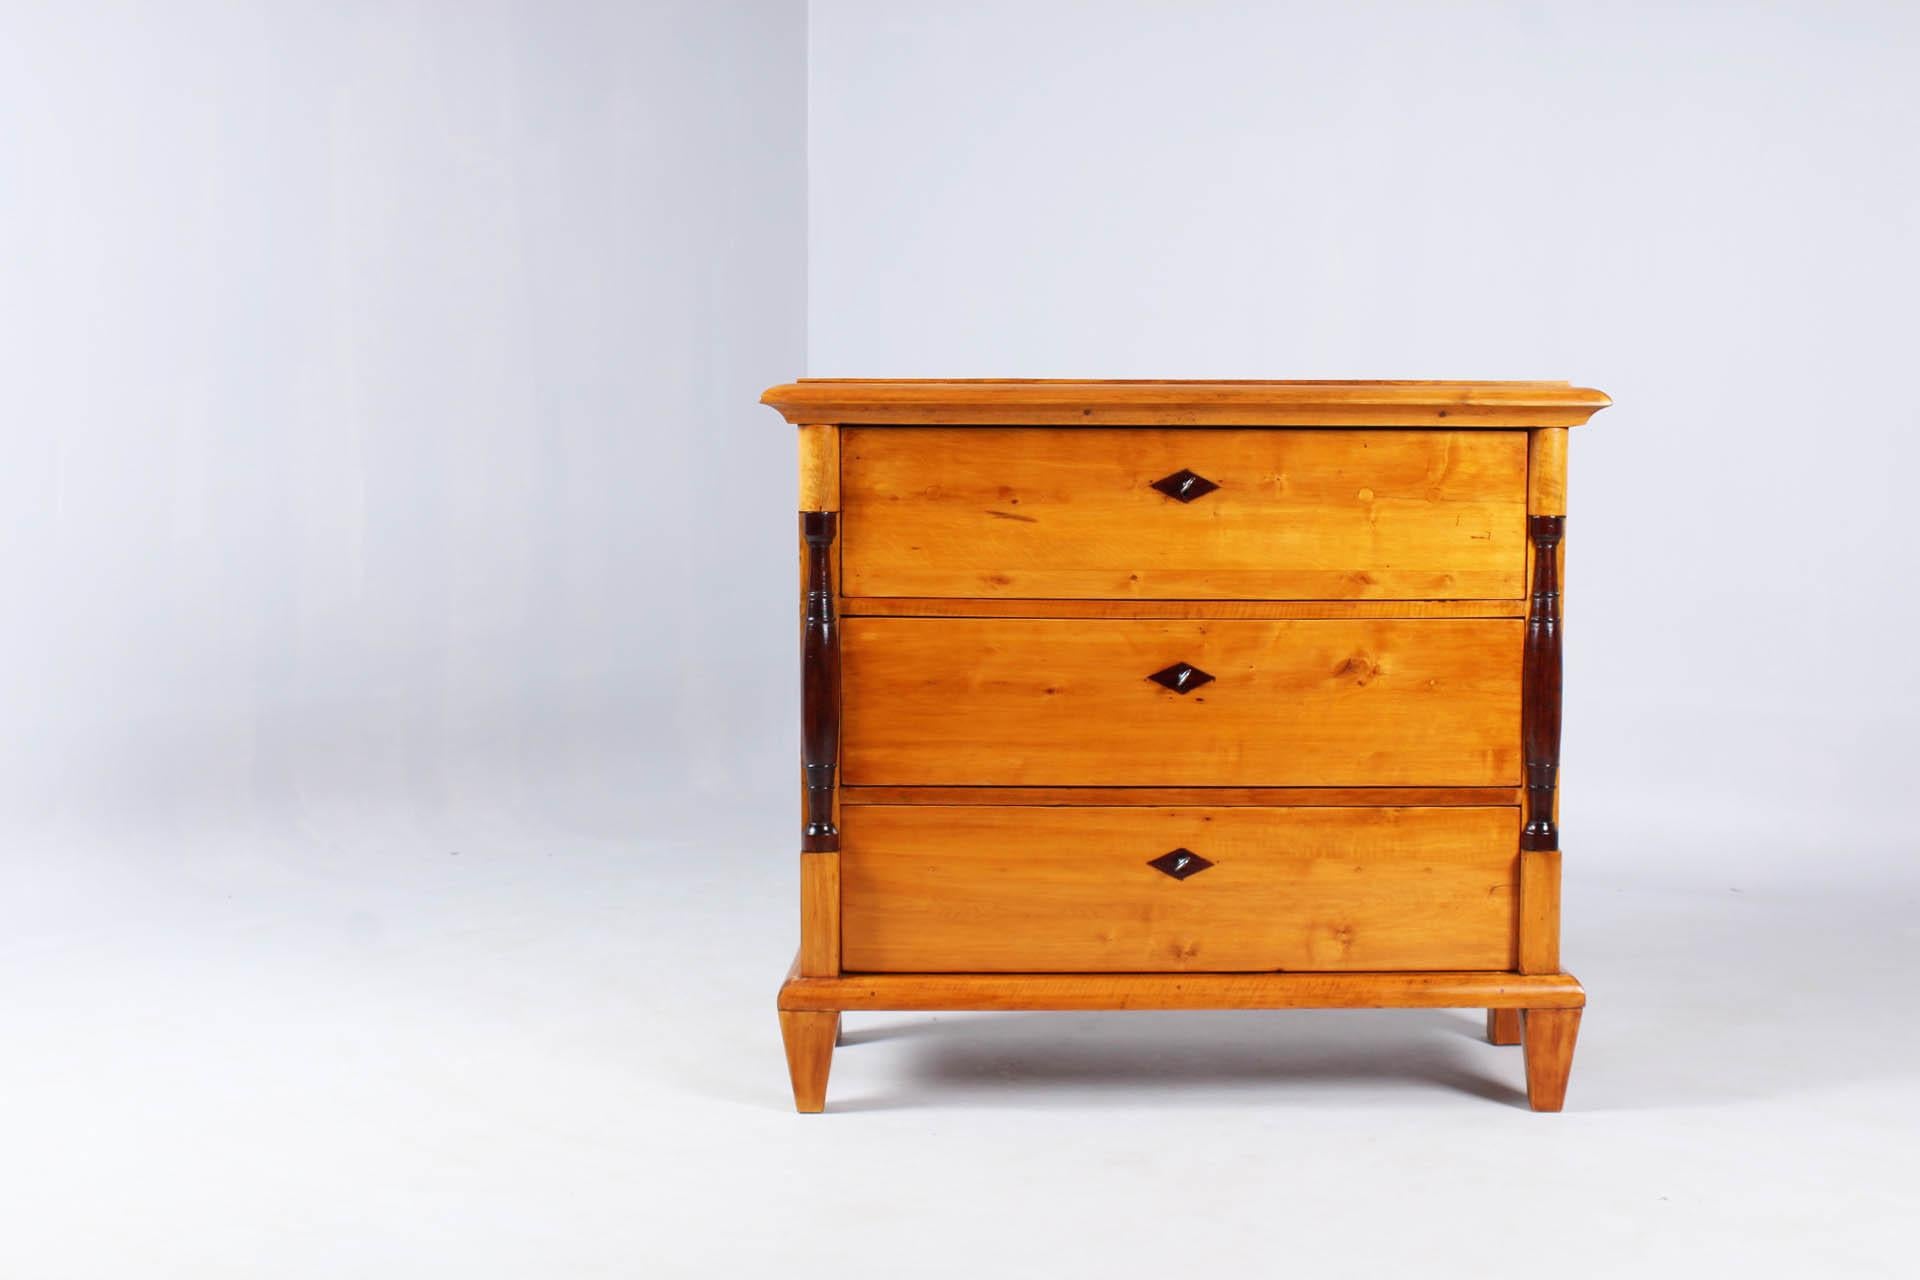 Antique chest of drawers made of solid birch

Scandinavia
Birch
Biedermeier around 1835

Dimensions: H x W x D: 97 x 110 x 48 cm

Description:
Compact piece of furniture on pointed legs in front and block feet in back.
Three drawers are